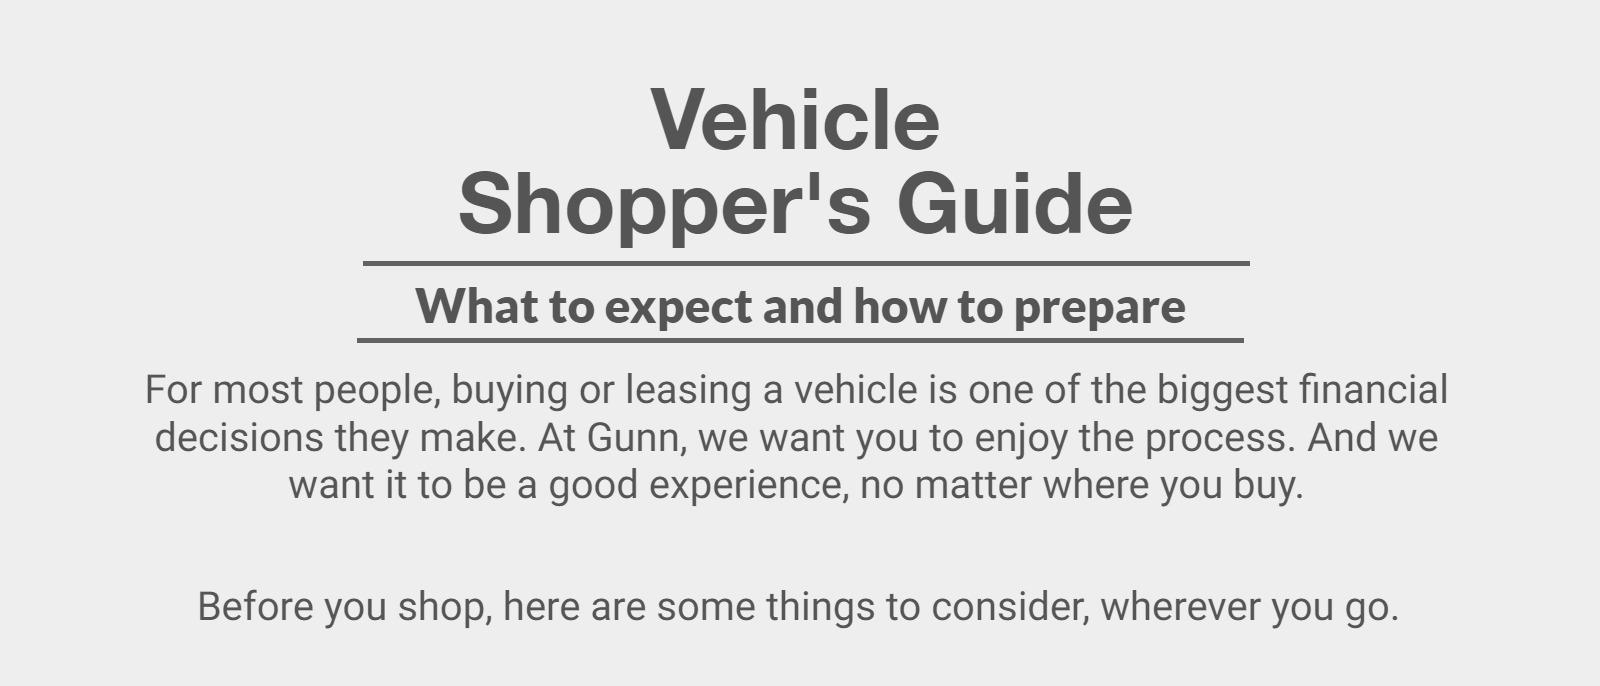 Vehicle
Shopper's Guide
What to expect and how to prepare
For most people, buying or leasing a vehicle is one of the biggest financial decisions they make. At Gunn, we want you to enjoy the process. And we want it to be a good experience, no matter where you buy.

Before you shop, here are some things to consider, wherever you go.